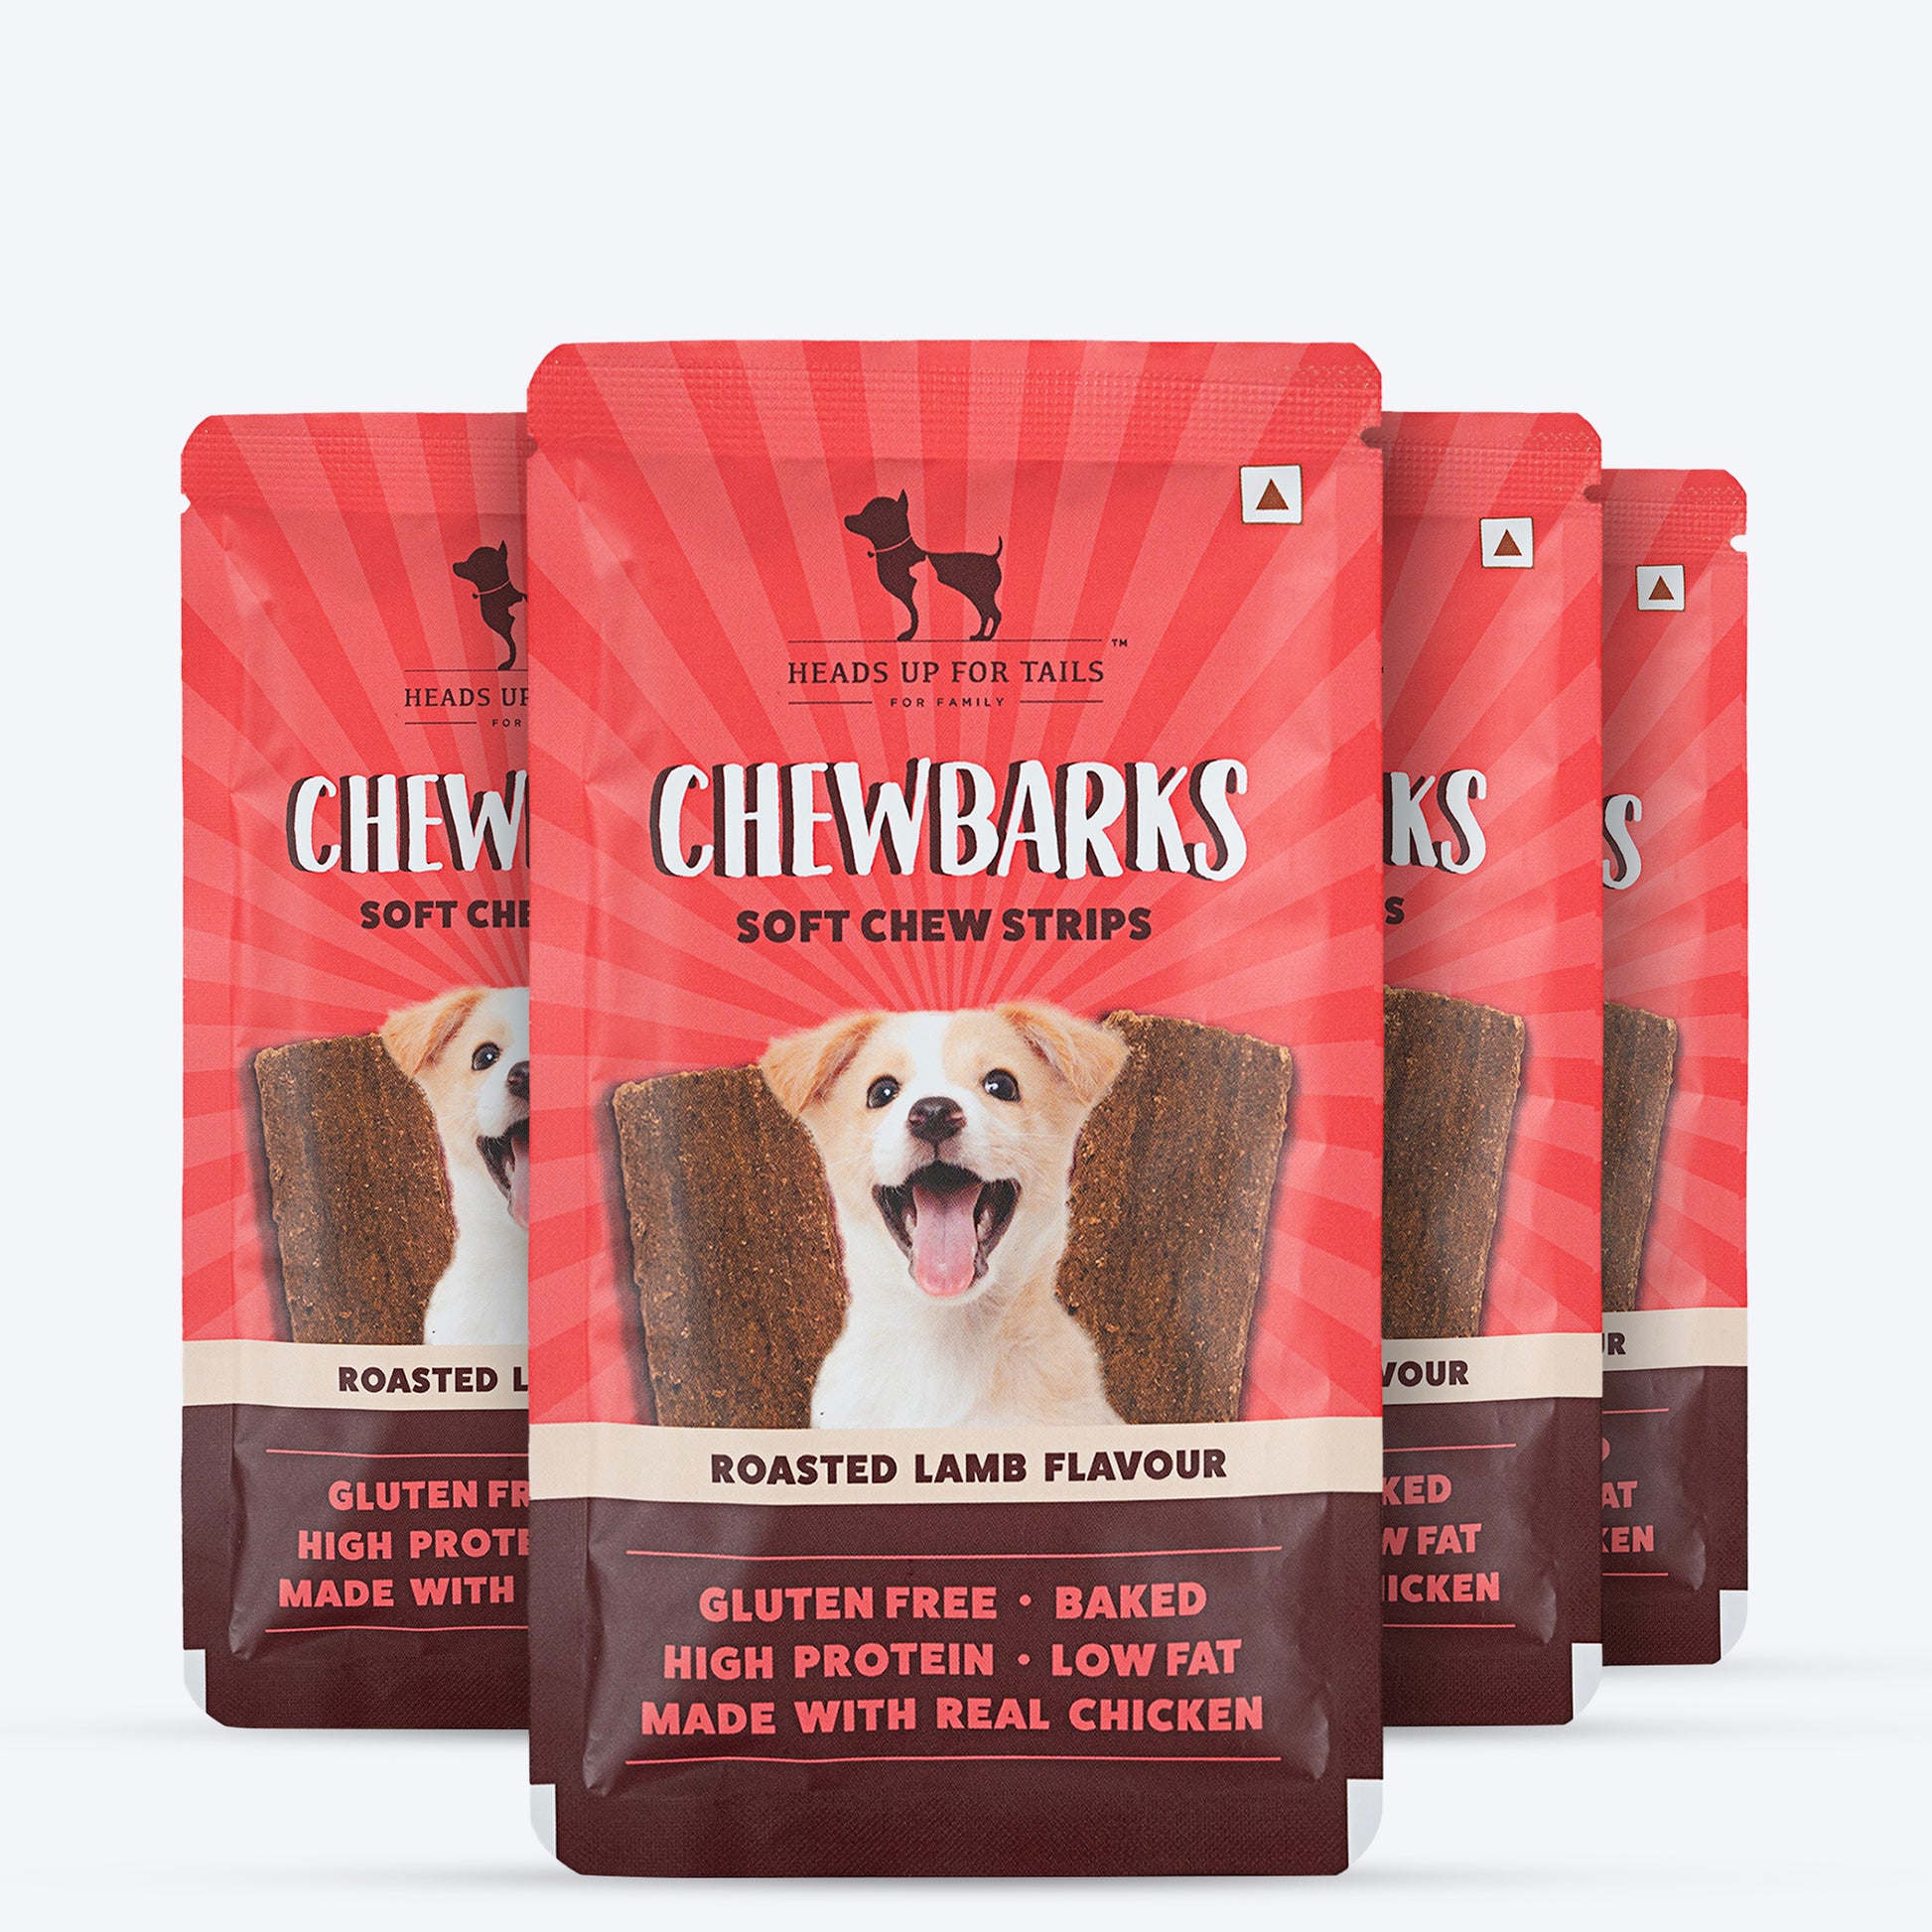 HUFT Chewbarks Roasted Lamb Soft Chew Strips Treat For Dogs - 30g - Heads Up For Tails